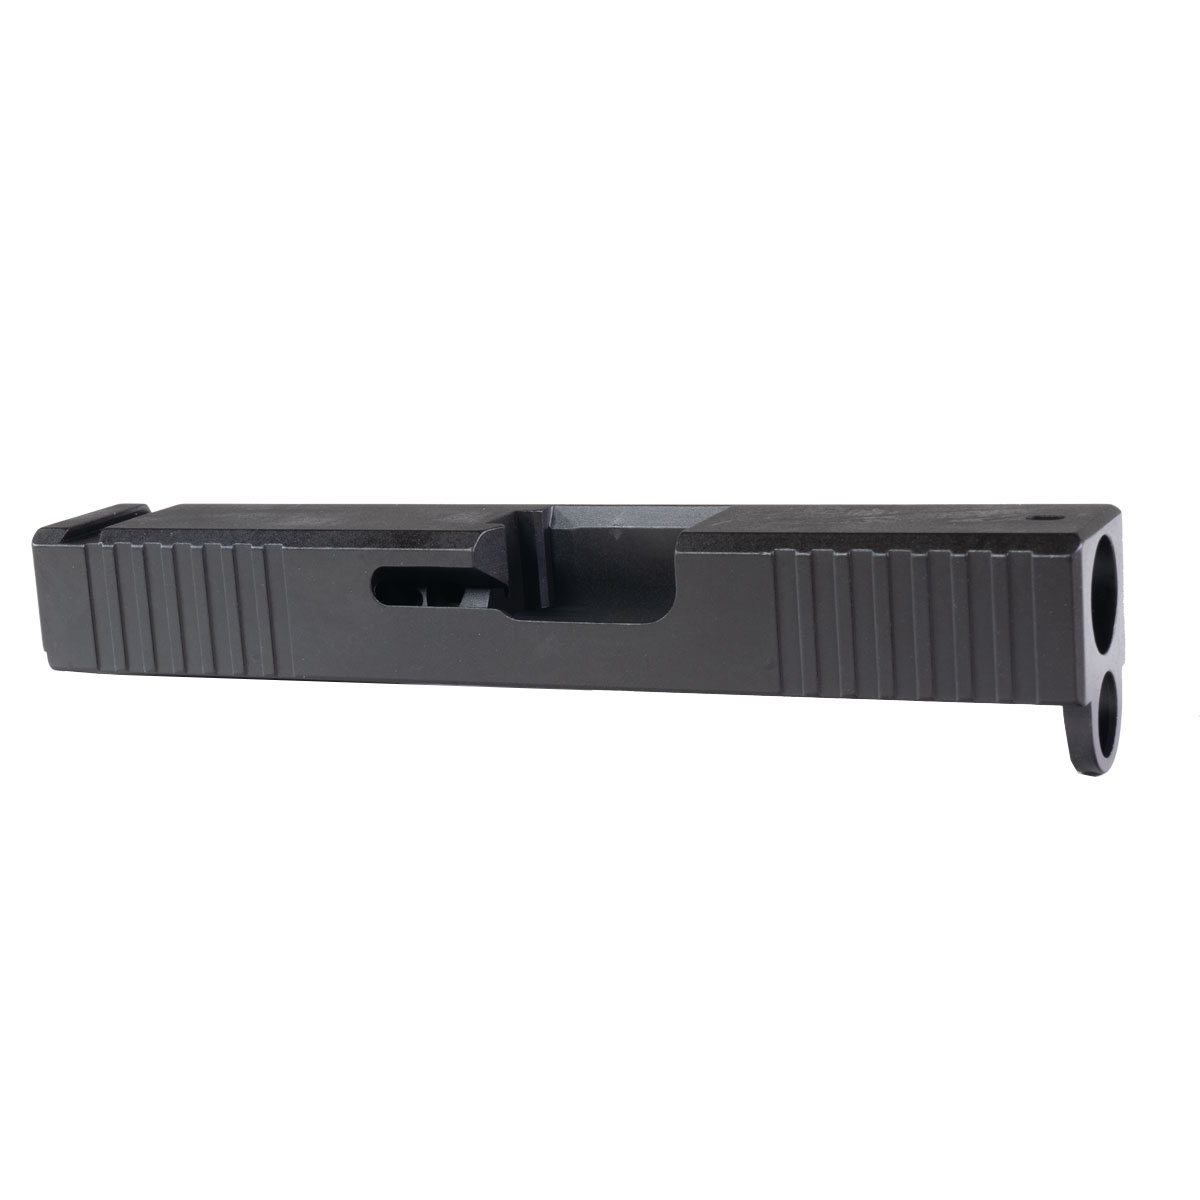 MMC Armory 26 Subcompact Slide - Gen3 G26 416 Heat Treated Stainless Steel Nitride Finish